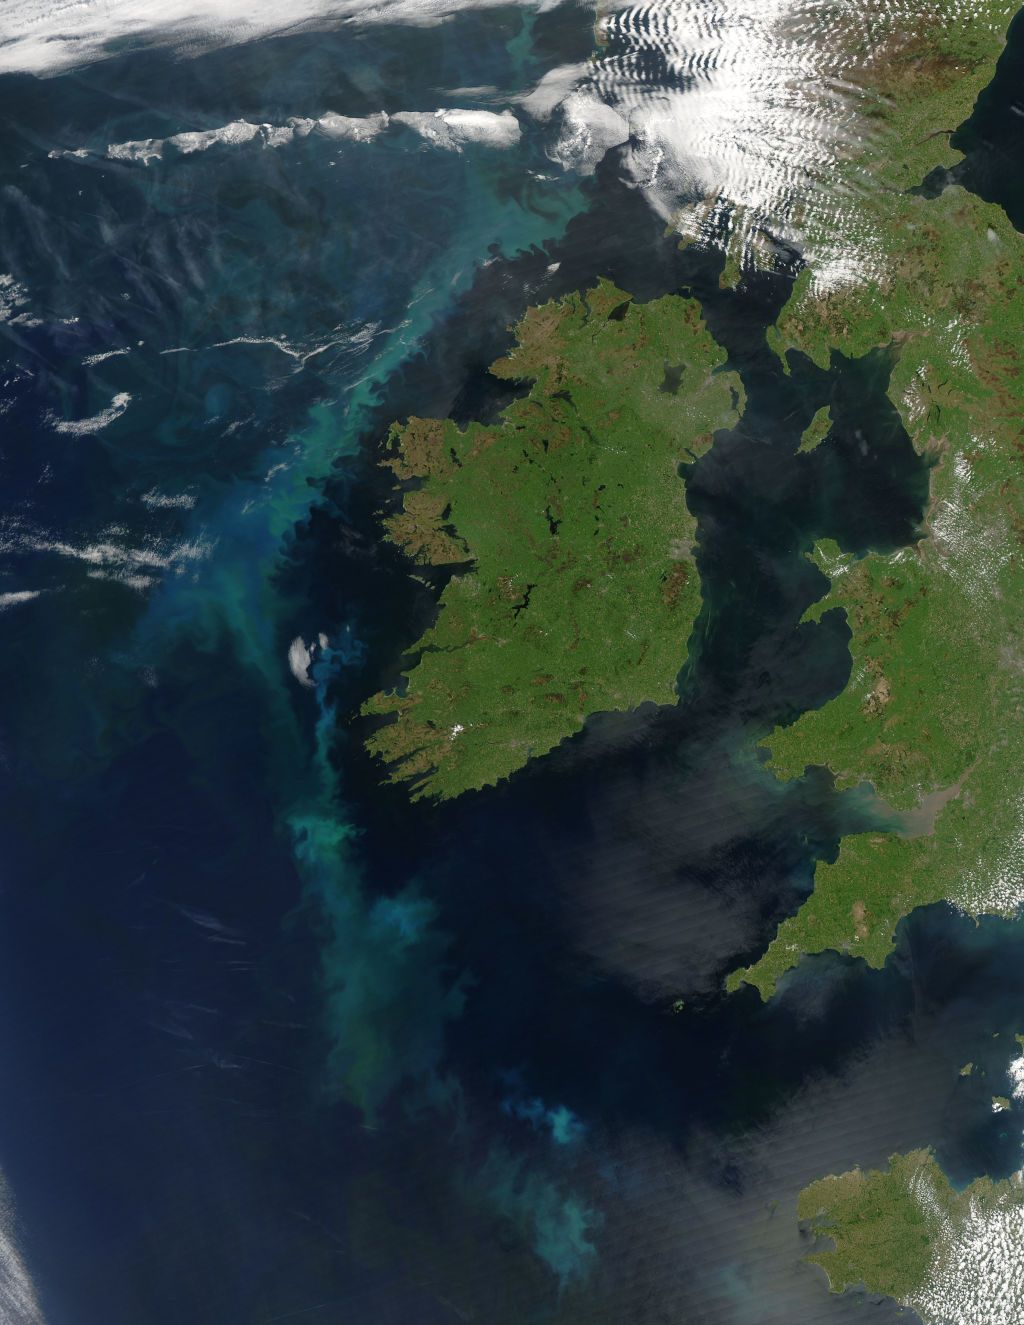 An algal bloom formed by phytoplankton off the west coast of Ireland.